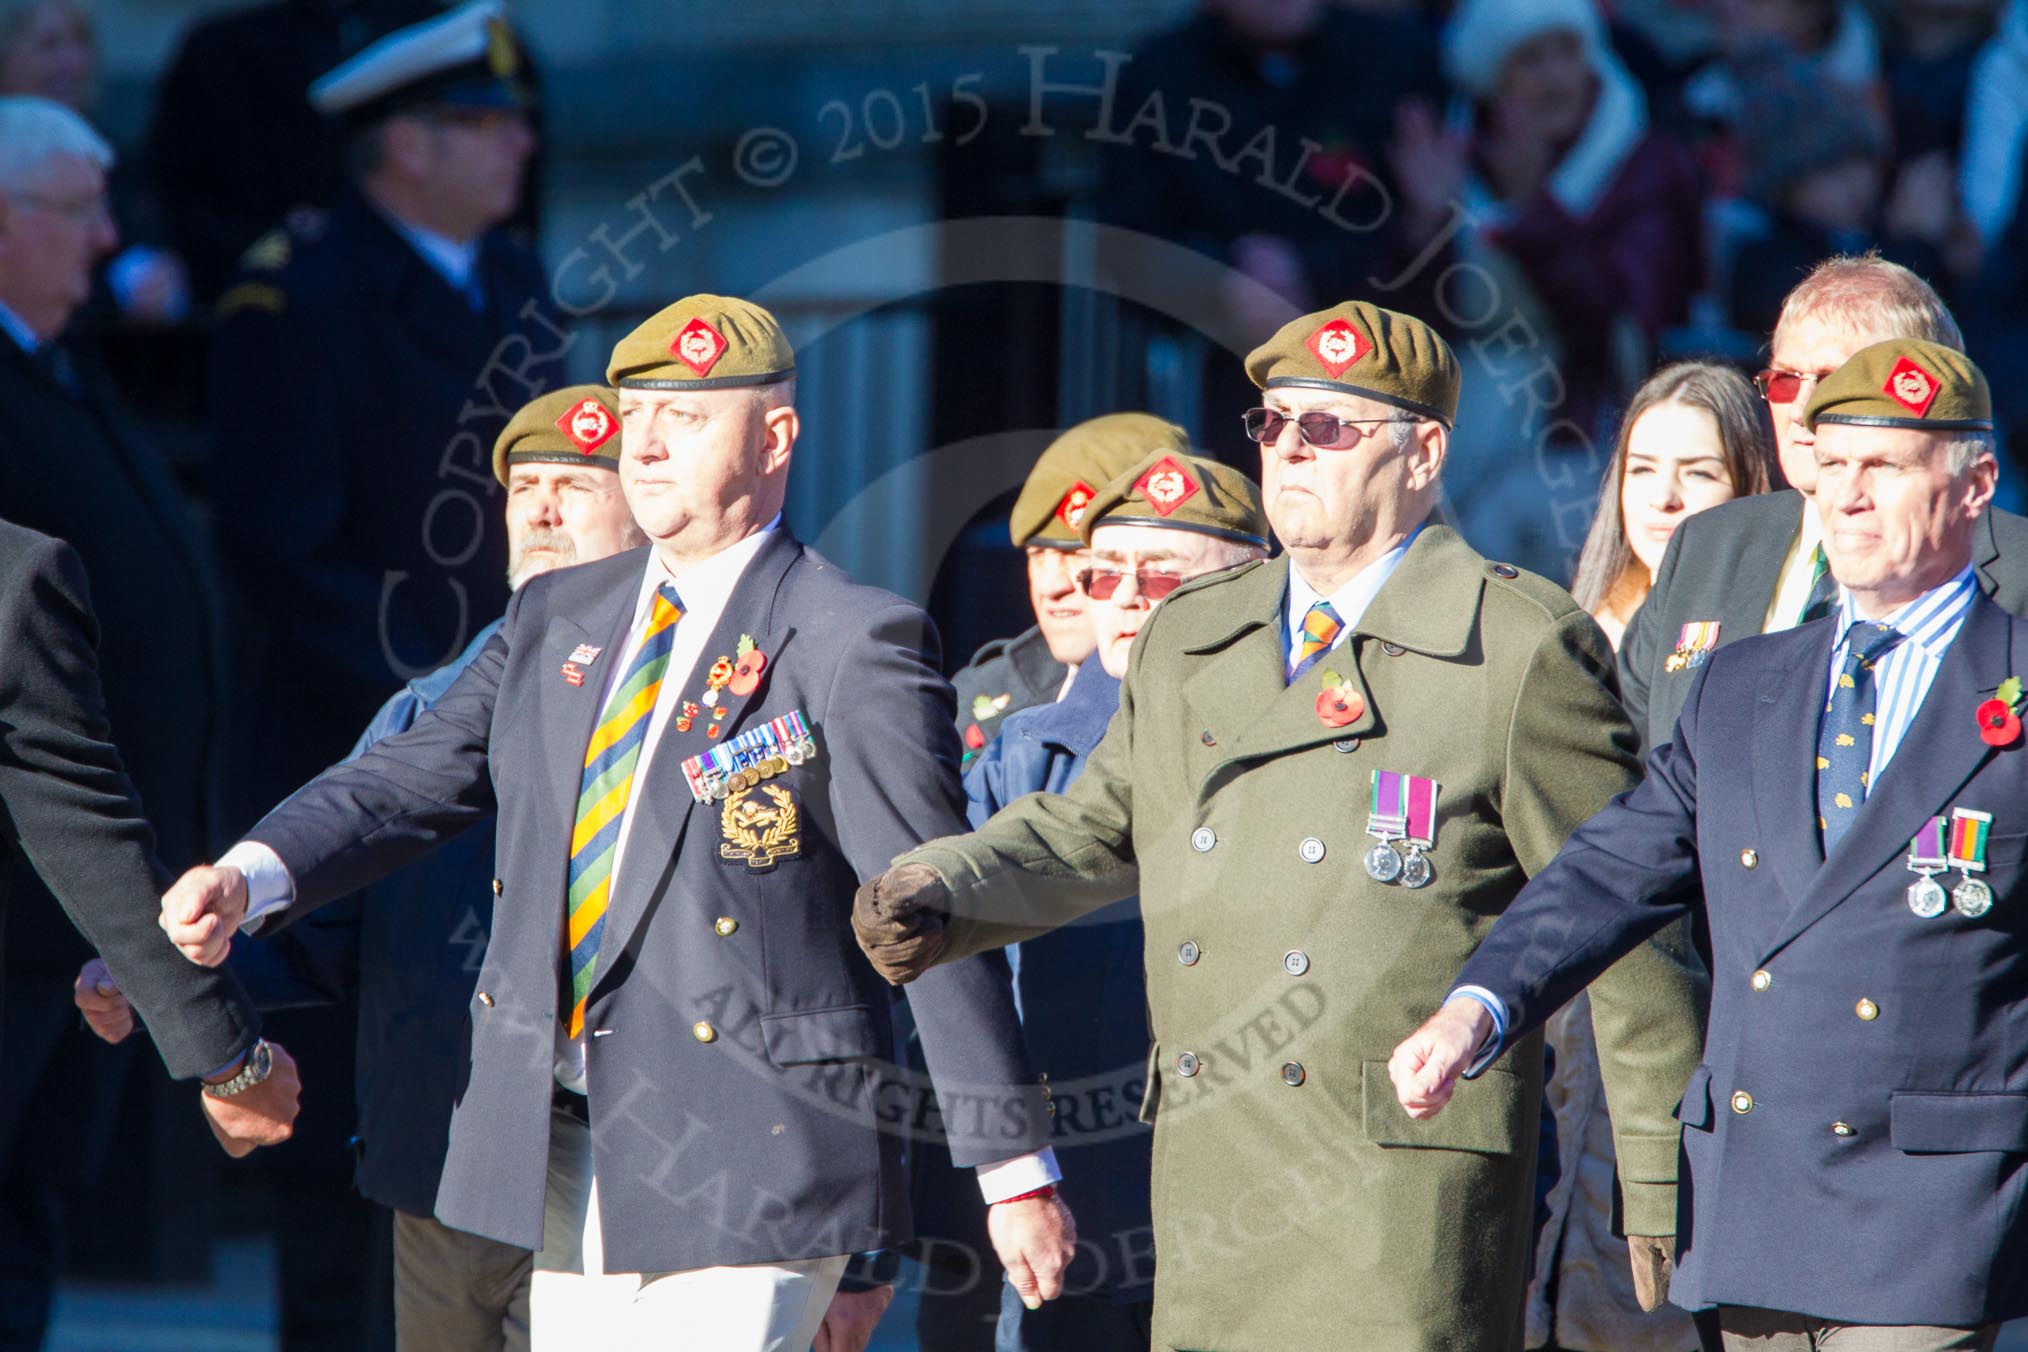 Remembrance Sunday Cenotaph March Past 2013: A3 - The Duke of Lancaster's Regimental Association..
Press stand opposite the Foreign Office building, Whitehall, London SW1,
London,
Greater London,
United Kingdom,
on 10 November 2013 at 11:54, image #1028